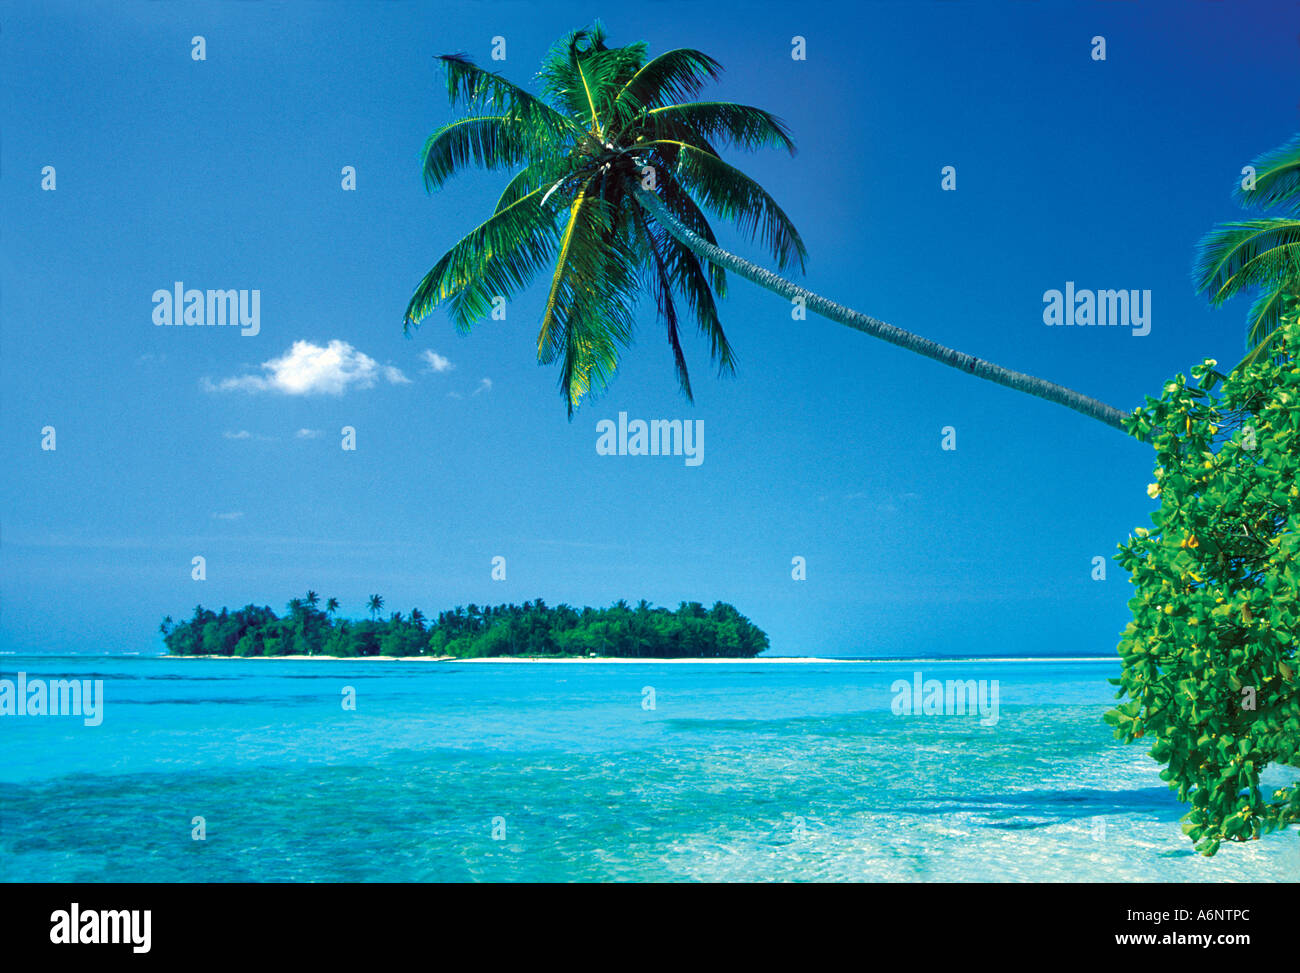 tropical island beach with palm trees Maldives Indian Ocean Stock Photo